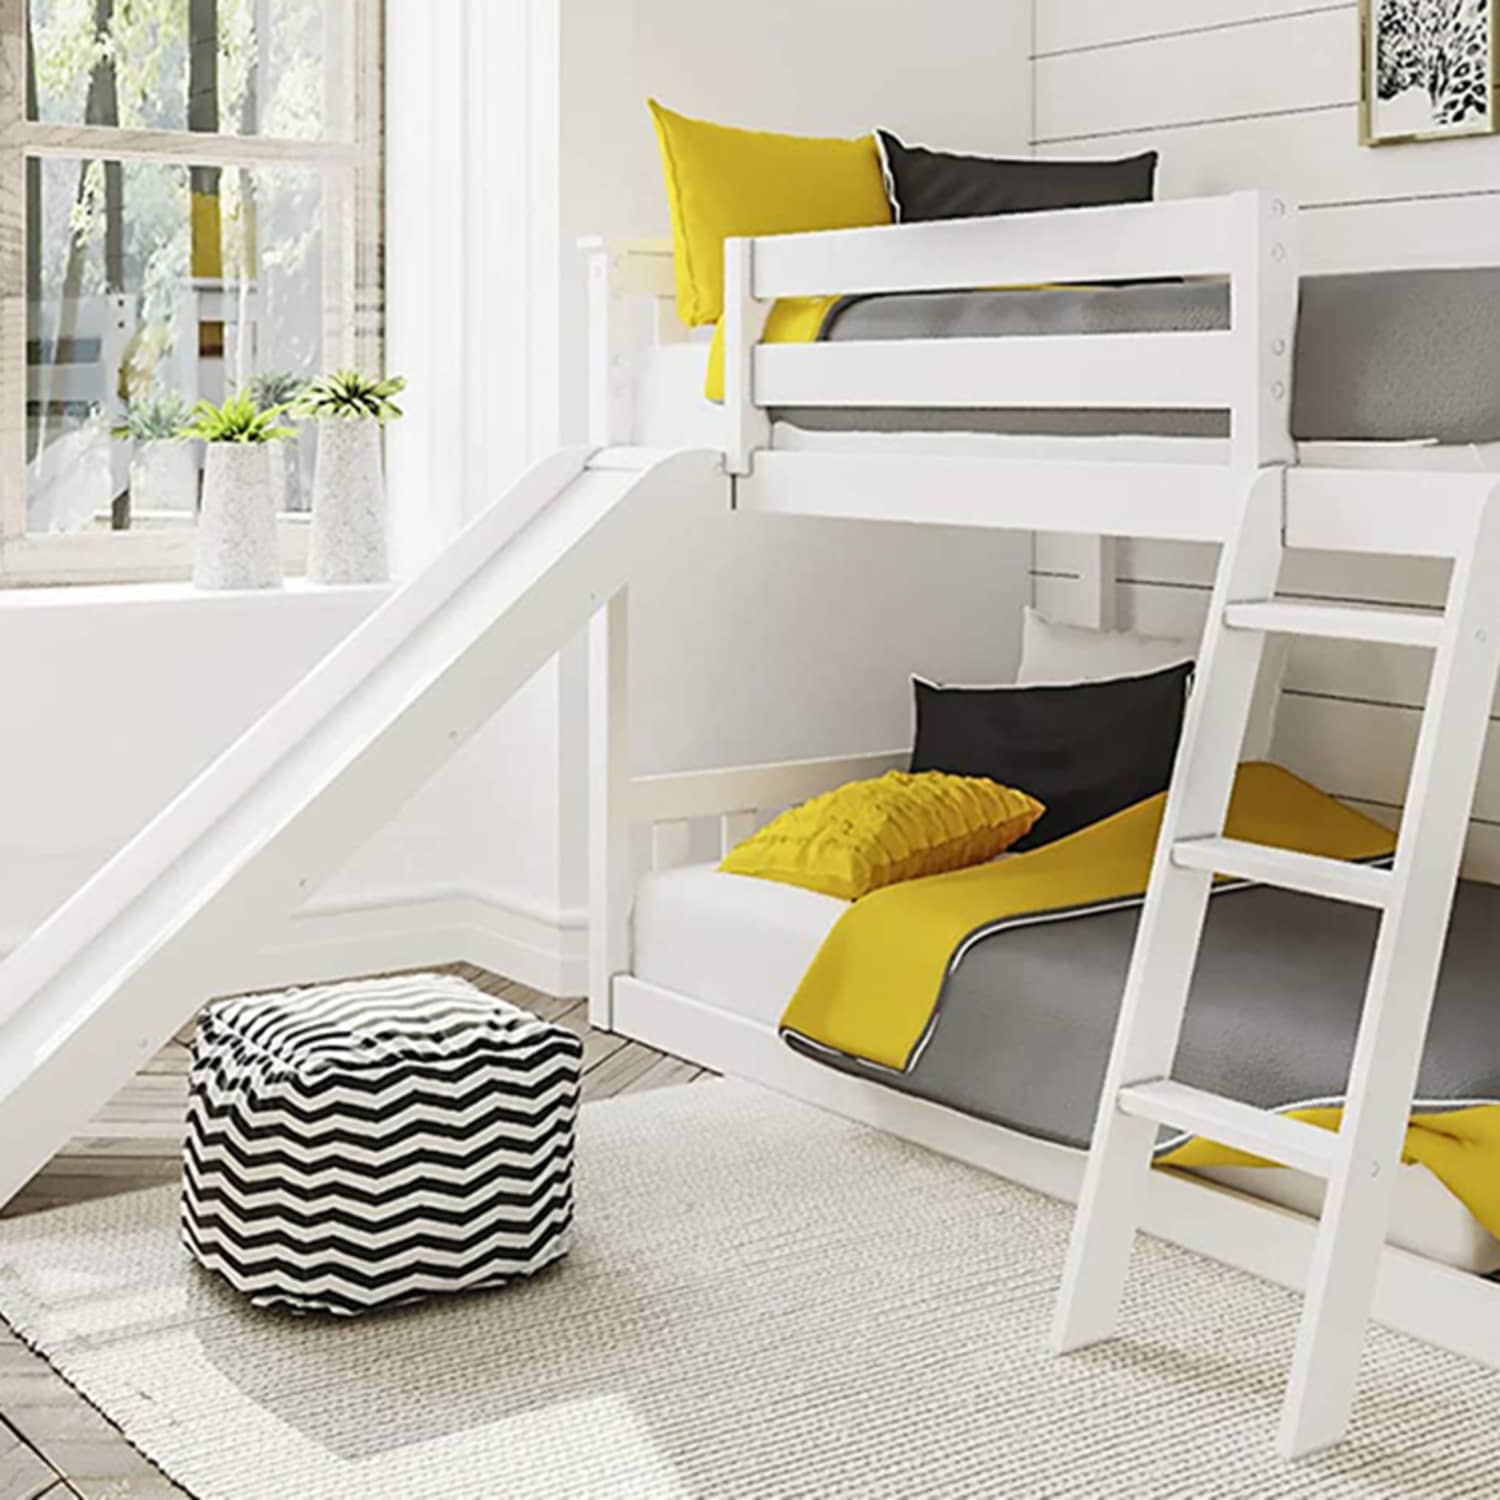 10 Best Kids Bed With Slides 2022: Pottery Barn Kids, Wayfair, Amazon |  Cubby